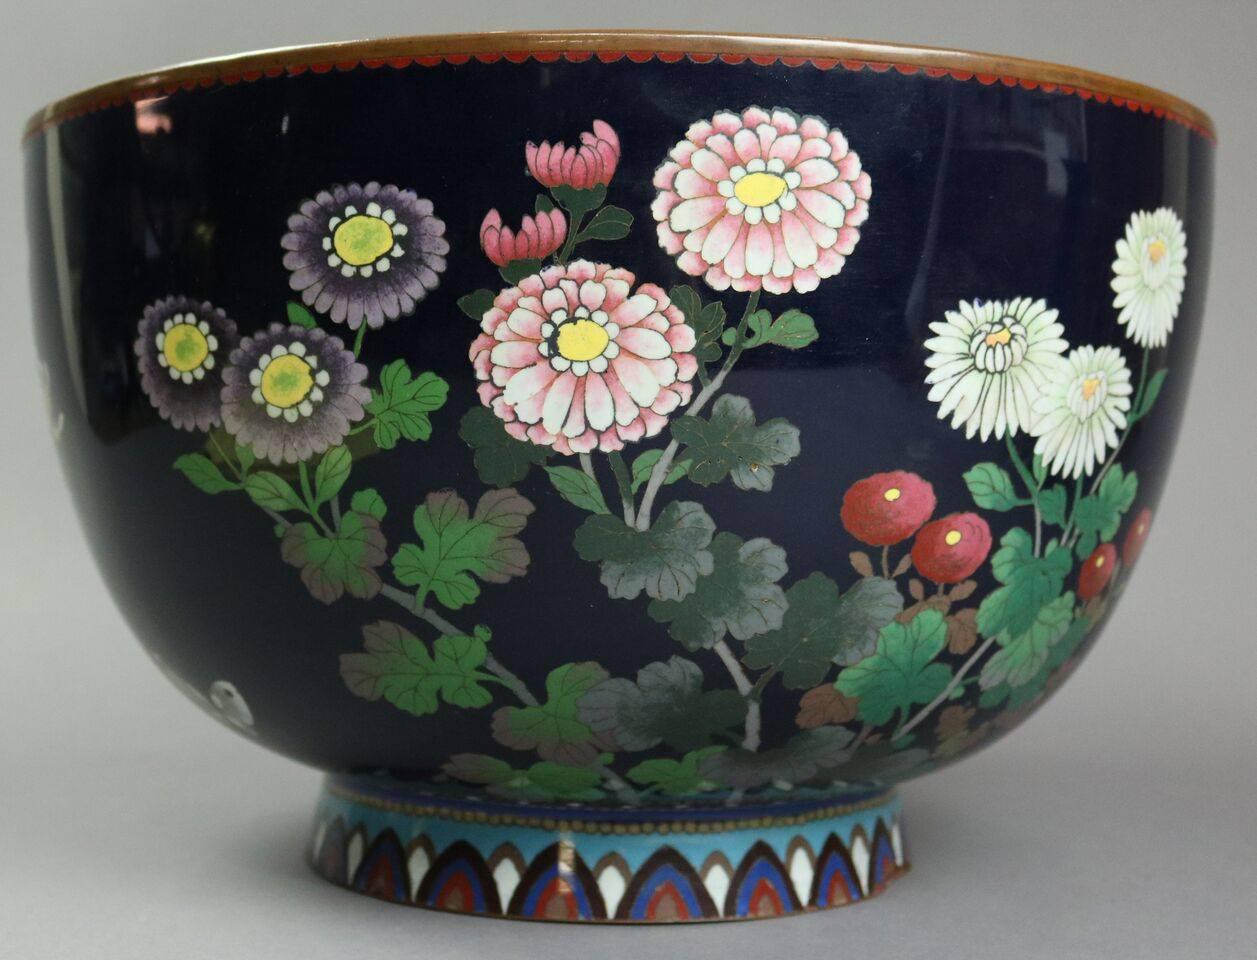 Oversized antique Japanese jardiniere of Meiji period features cloisonne enameled floral garden scene done in the Anglo-Japanese aesthetic, early 20th century.